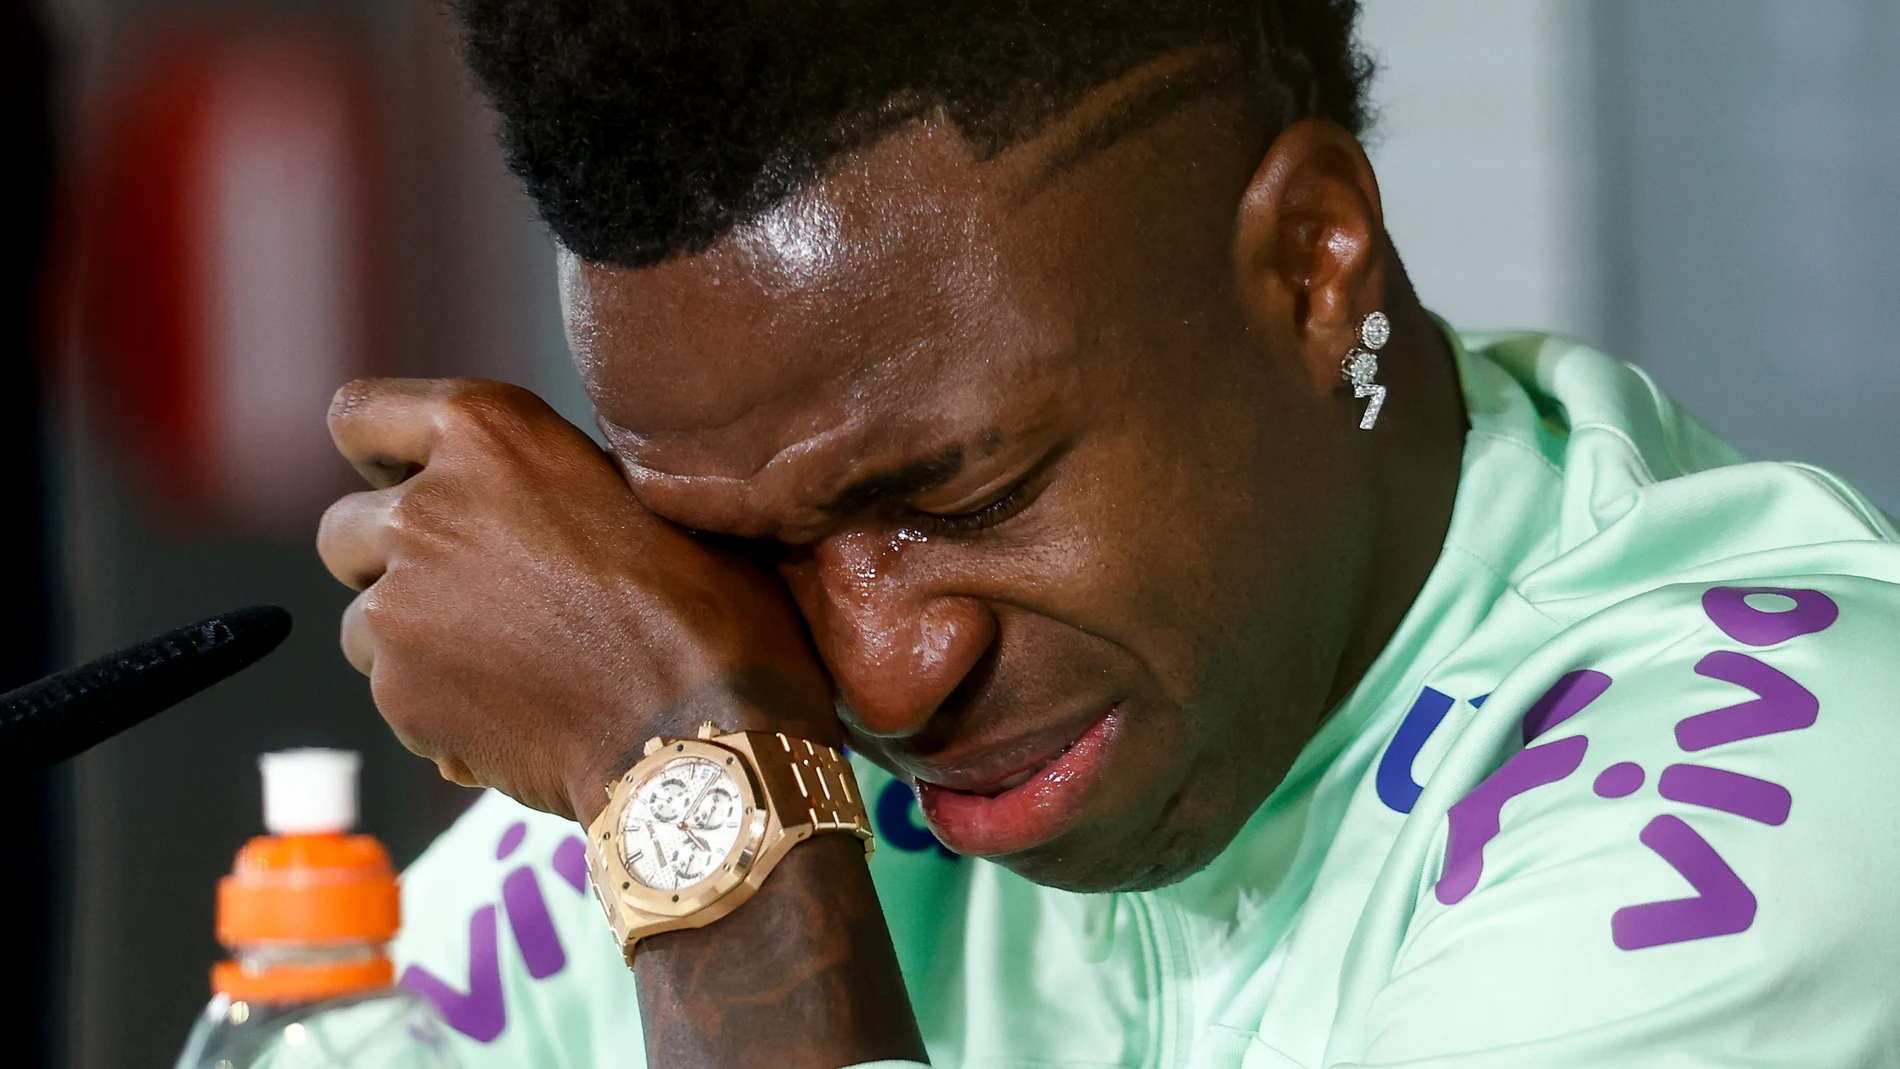 Vinicius Junior breaks down in tears during a press conference after a training session of the Brazil team ahead of a friendly soccer match against Spain on Monday March 25, 2024, in Valdebebas, Madrid, Spain. Vinicius Junior broke down in tears on Monday while talking about the racist insults that he has been subjected to in Spain, saying that he is losing his desire to keep playing because of what he has been going through. (AP Photo/Oscar J. Barroso)